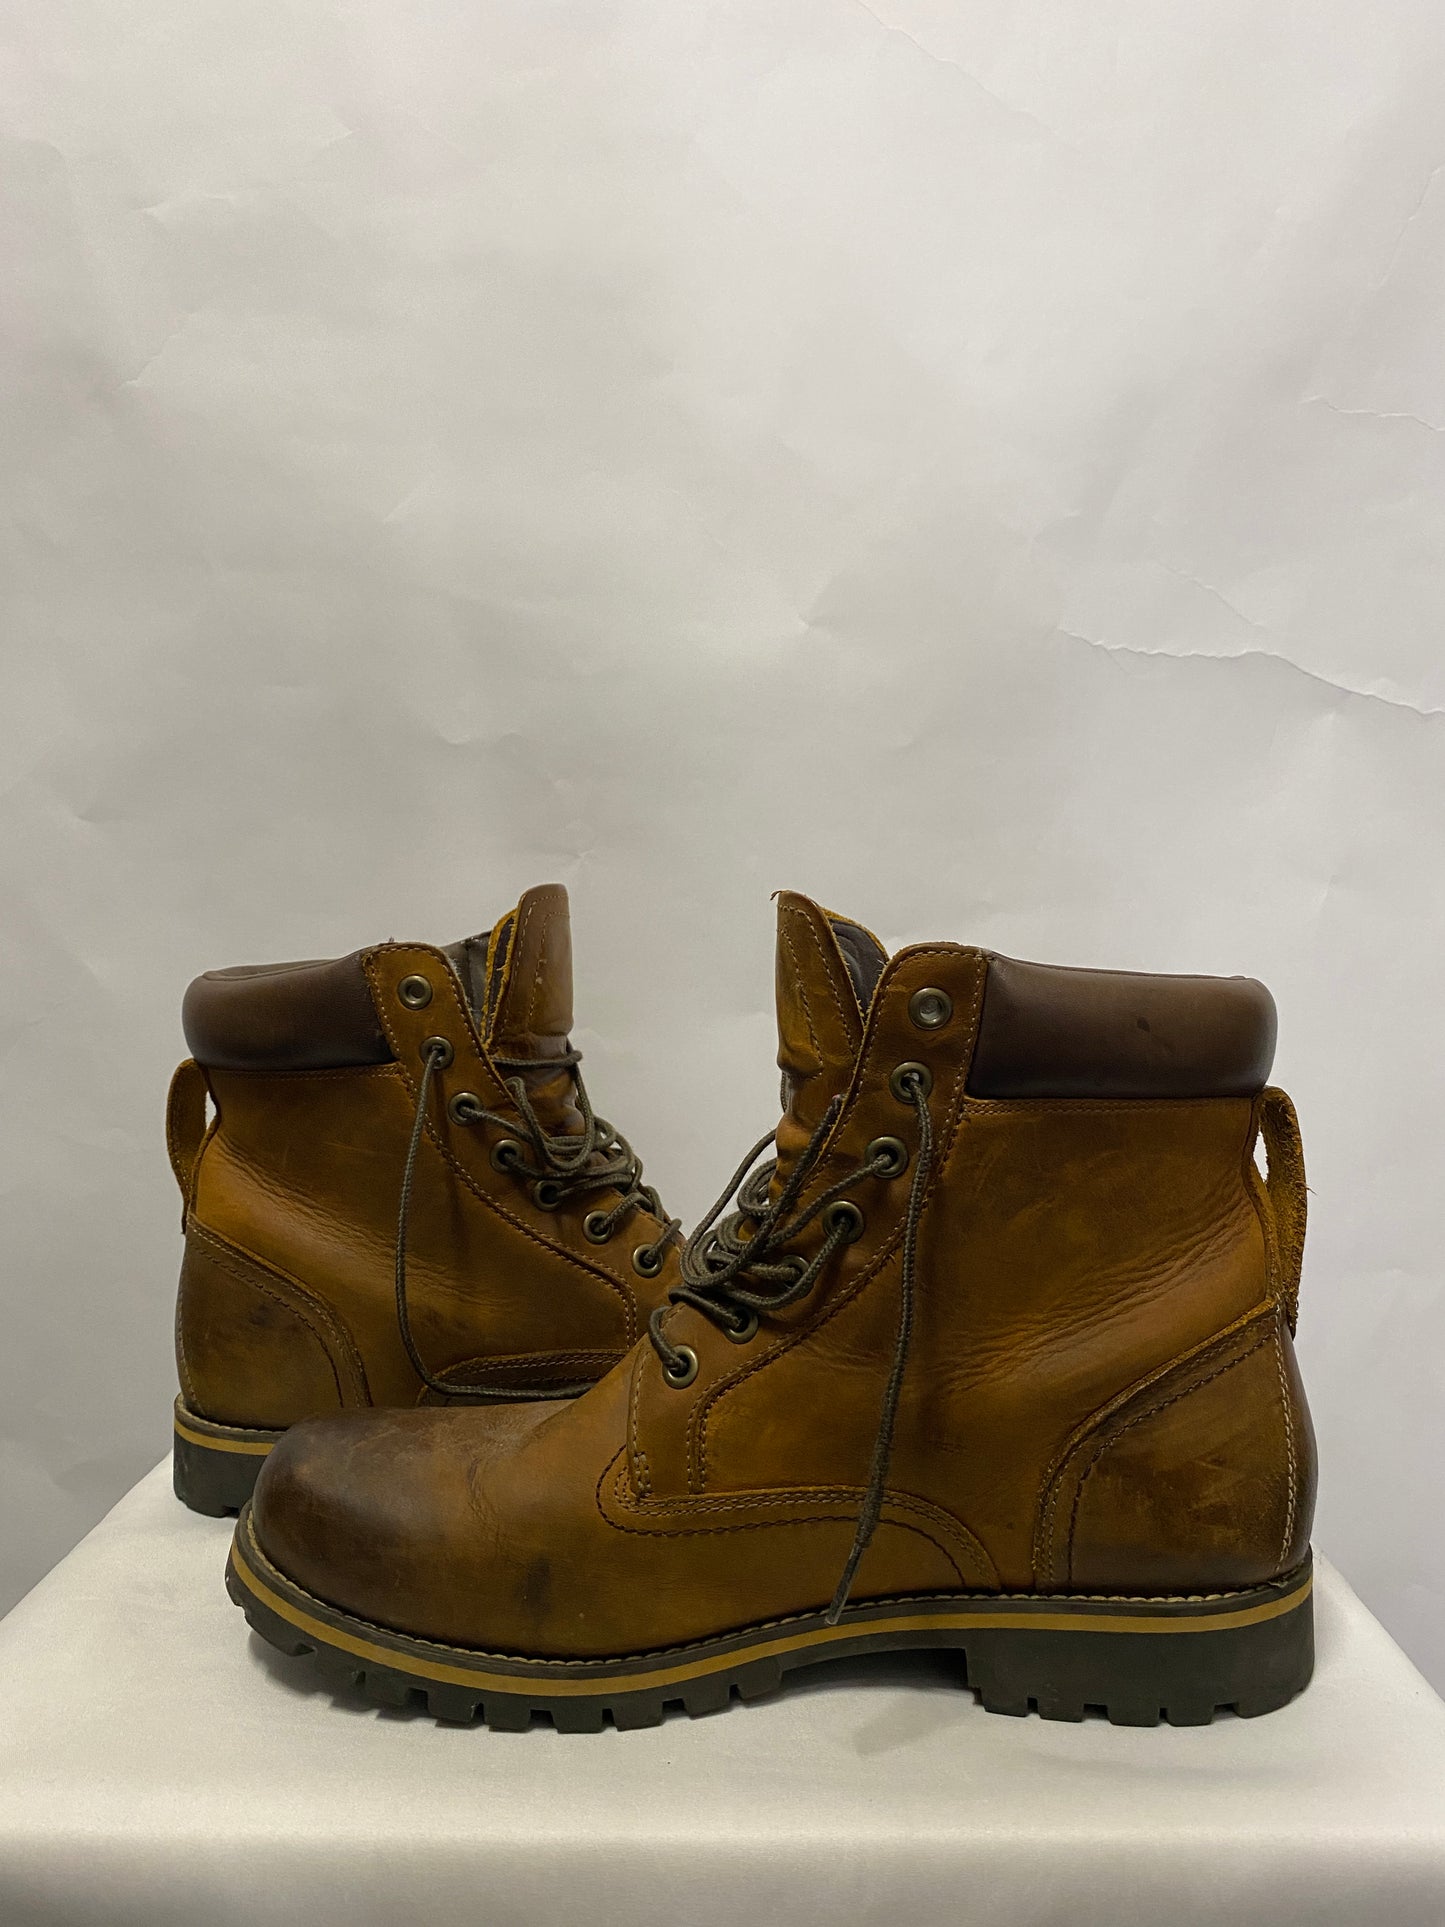 Timberland Brown Leather Waterproof Boots 9